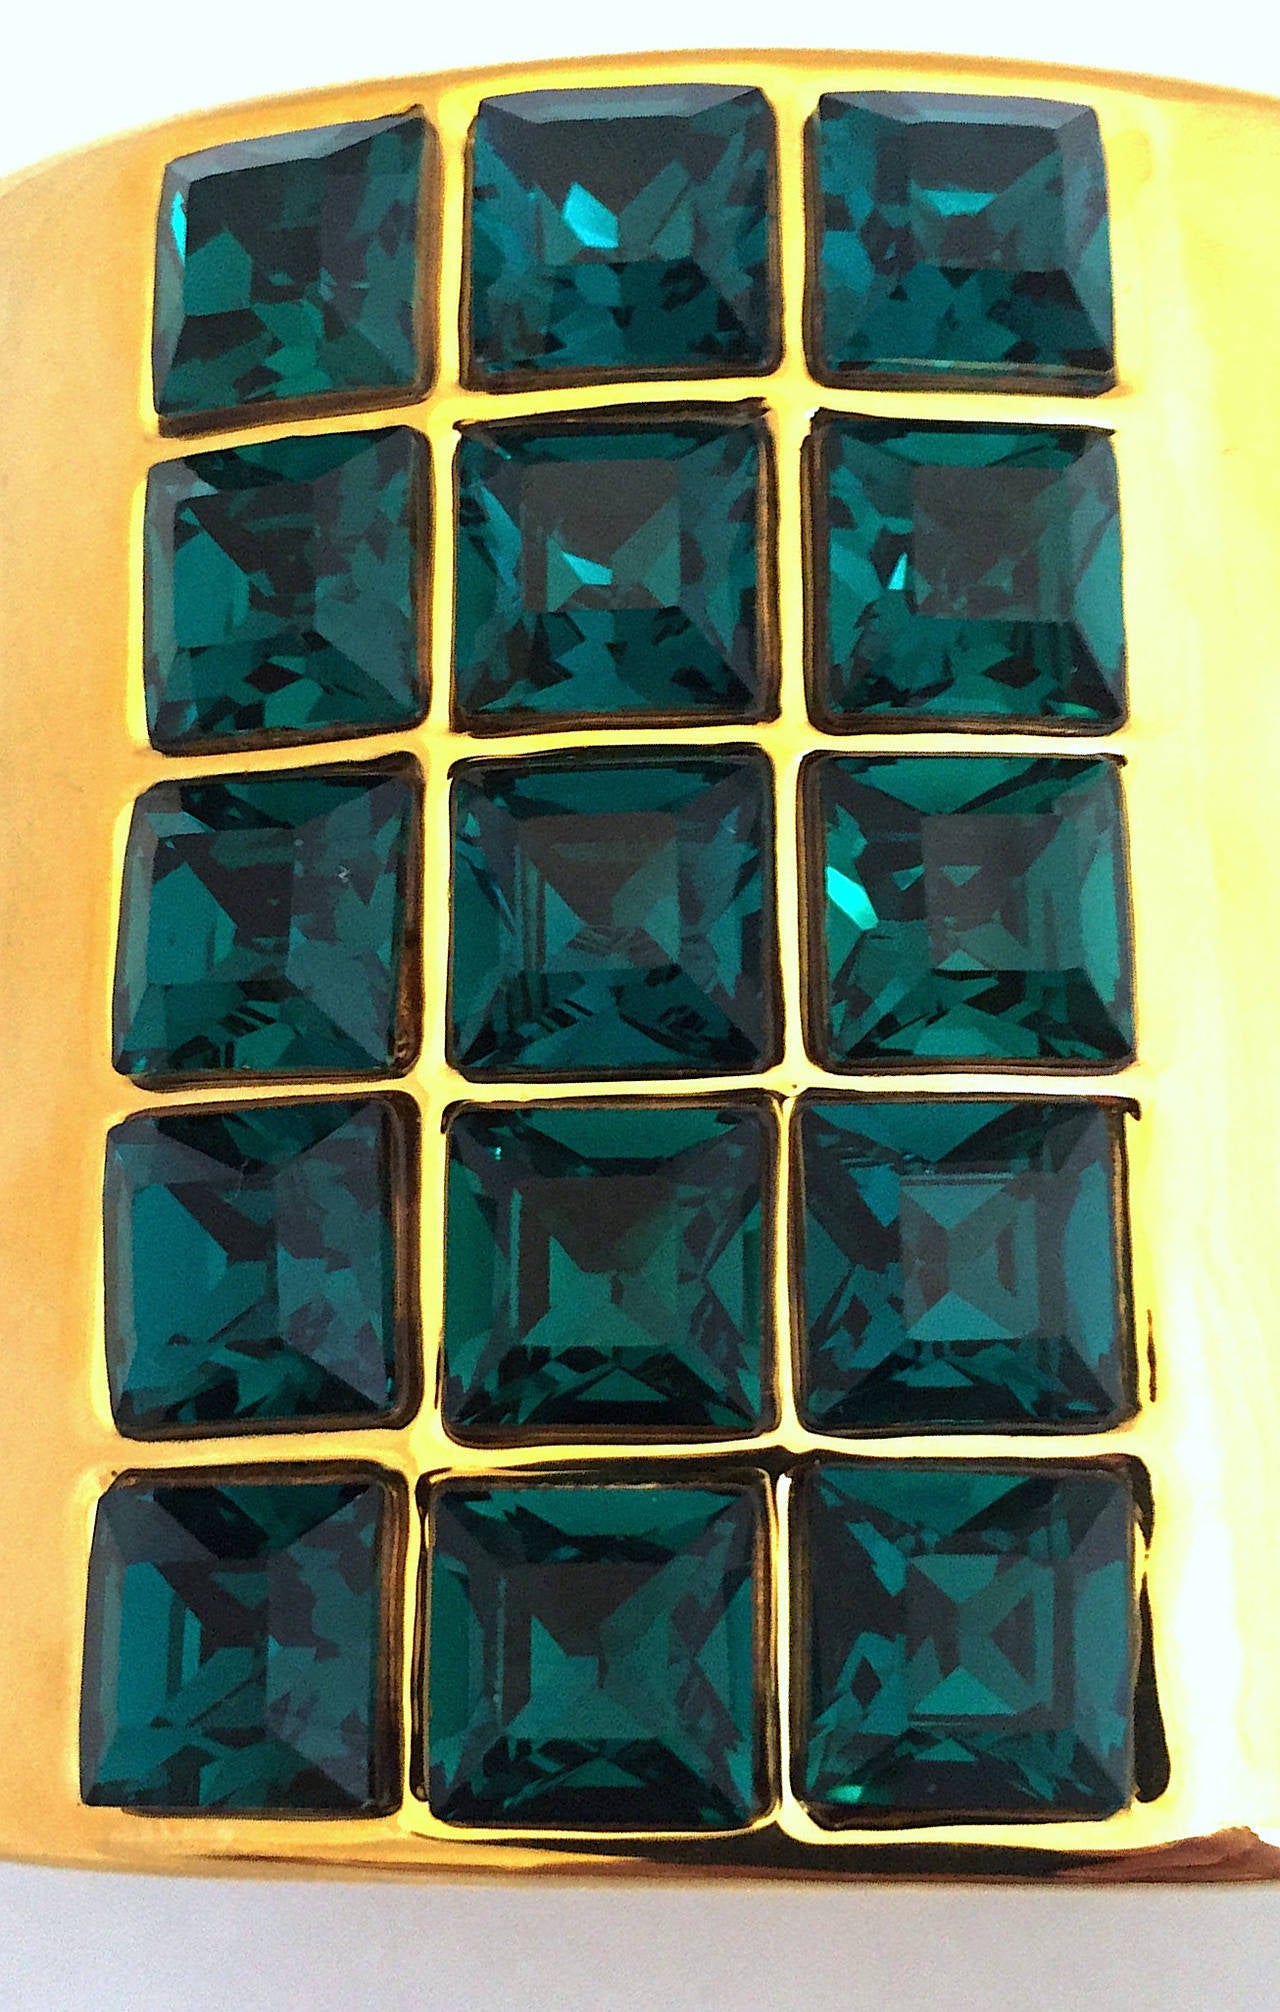 Two massive rare Kenneth Jay Lane KJL Cuffs with hinges and magnetic closures, each featuring 15 square emerald colored crystals. They are in excellent condition with minimal signs of wear.
Measurements: diameter 2.5